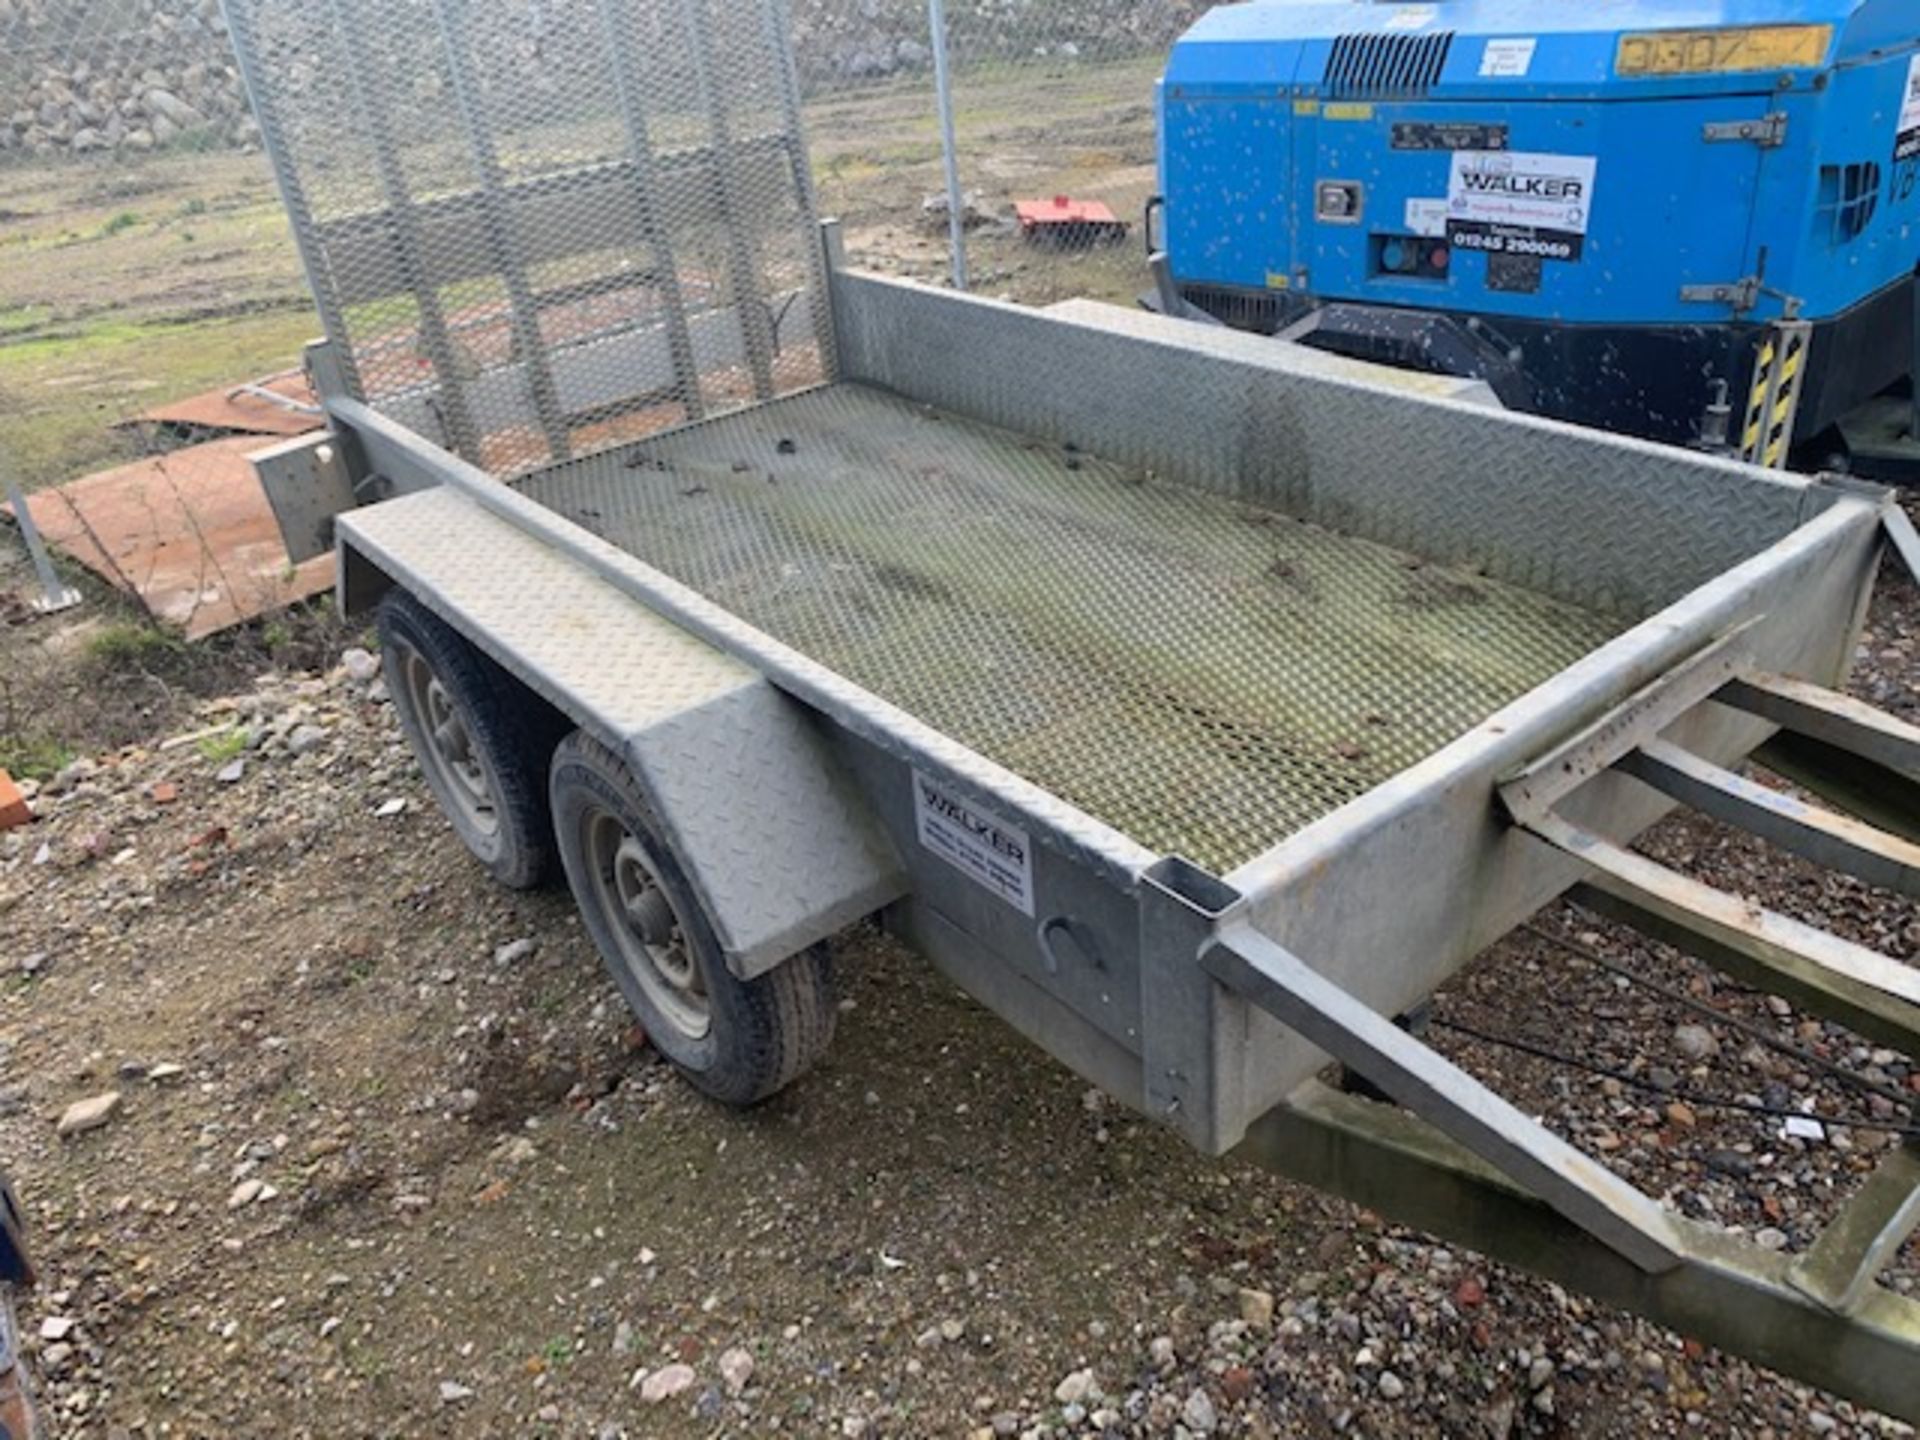 Unnamed twin axle towing trailer with built in loading ramp